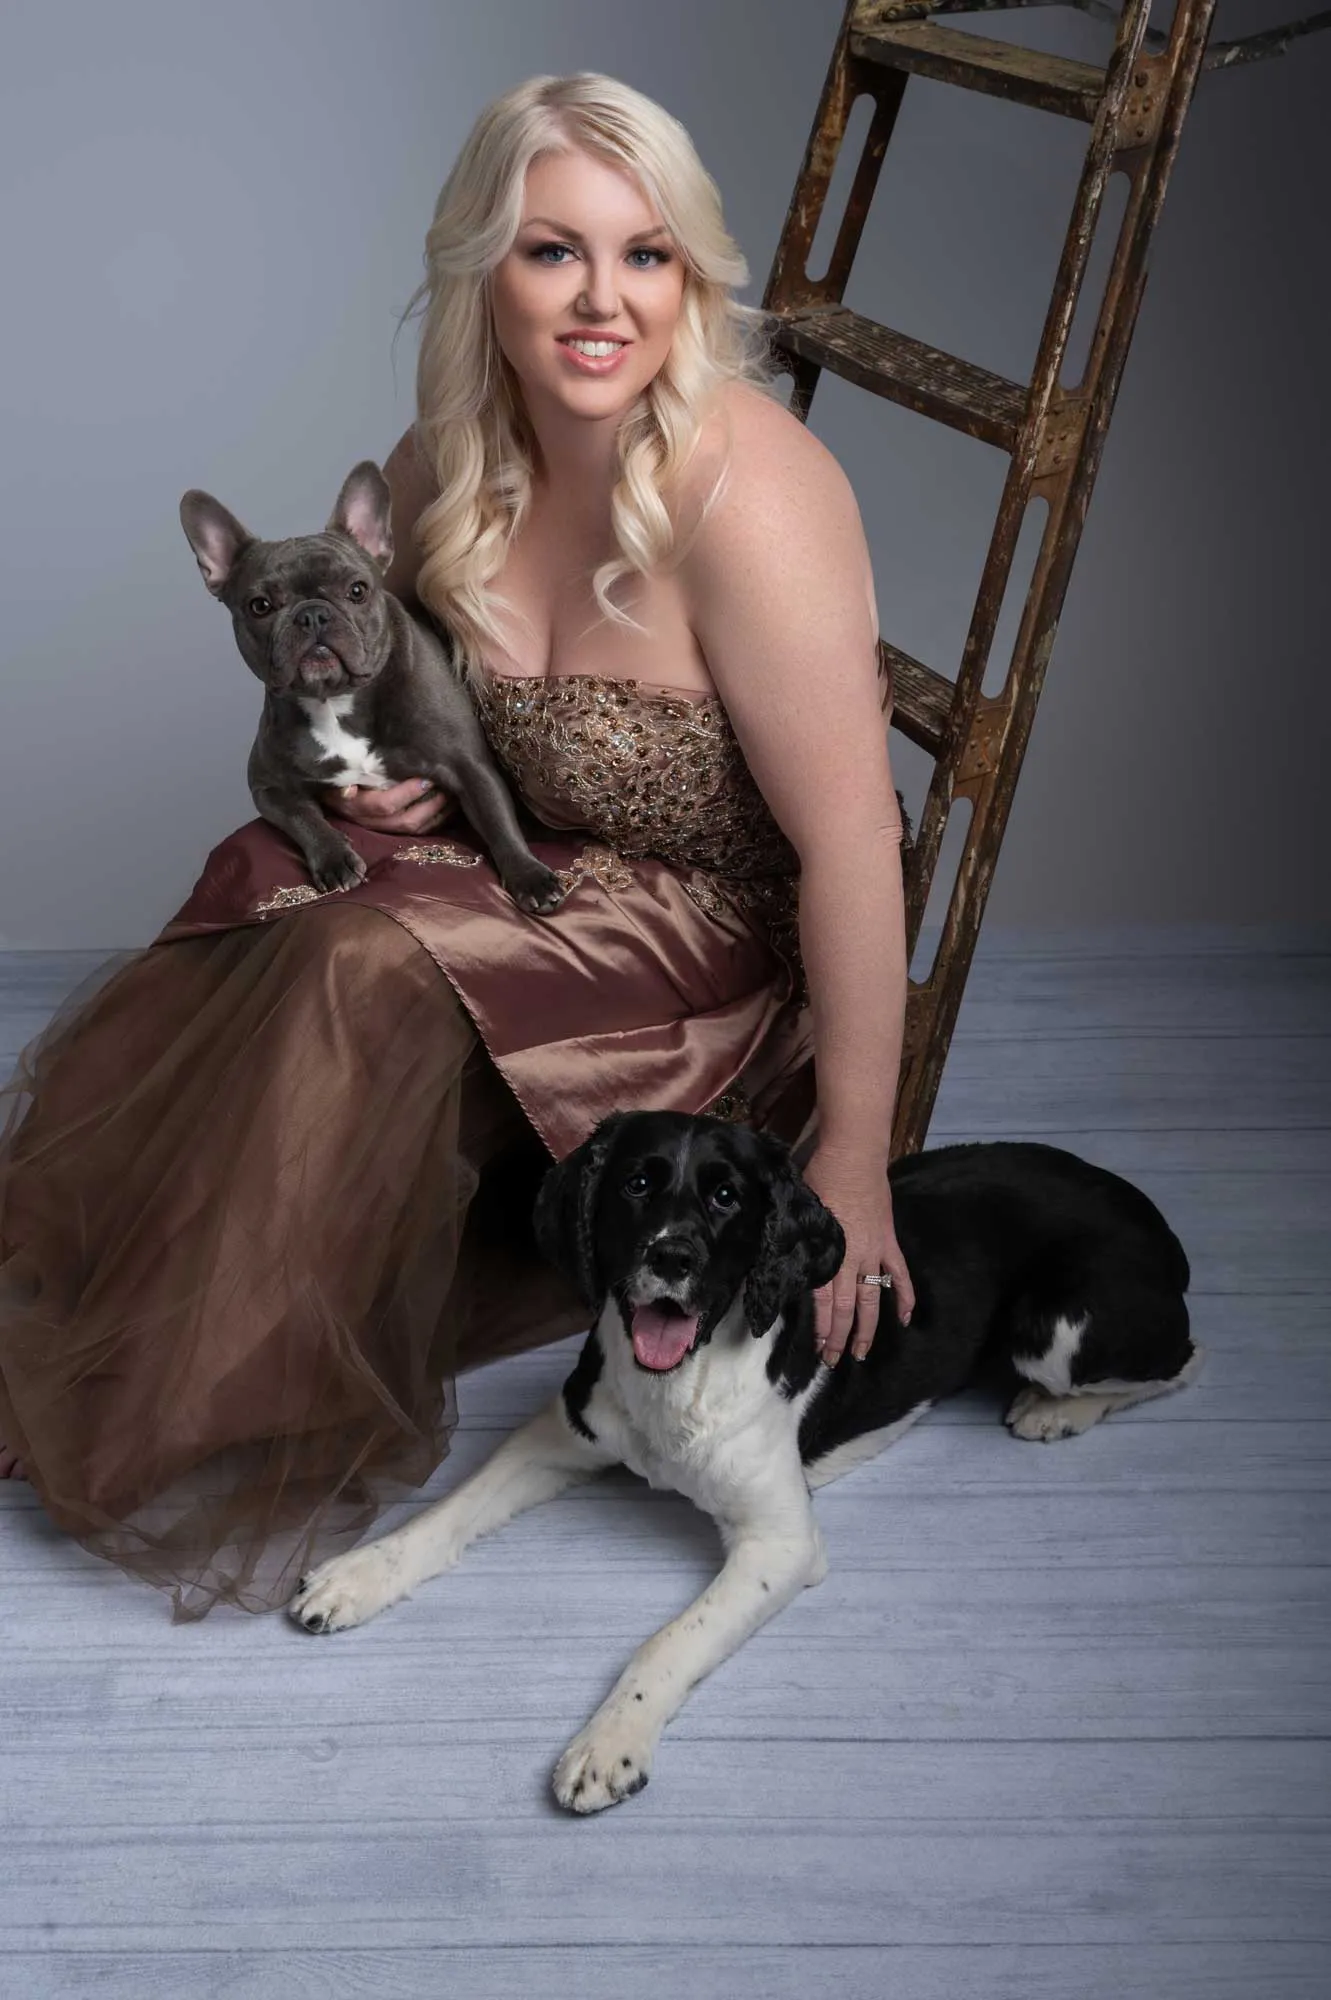 Blonde woman with dogs